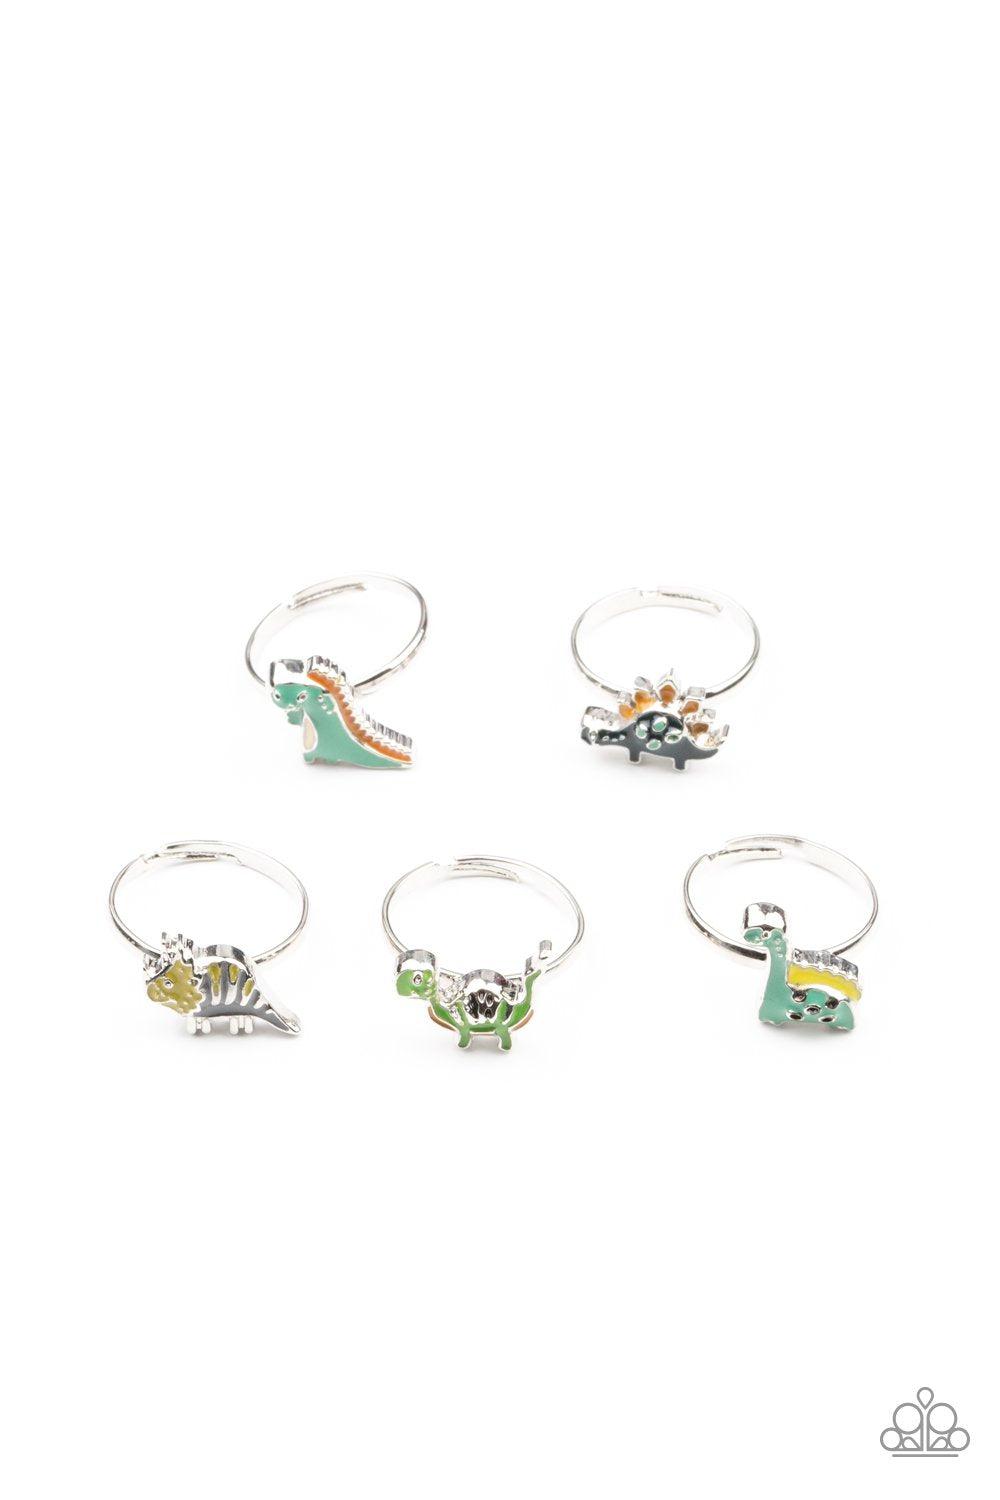 Starlet Shimmer Children&#39;s Dinosaur Rings - Paparazzi Accessories (set of 5) - Full set -CarasShop.com - $5 Jewelry by Cara Jewels